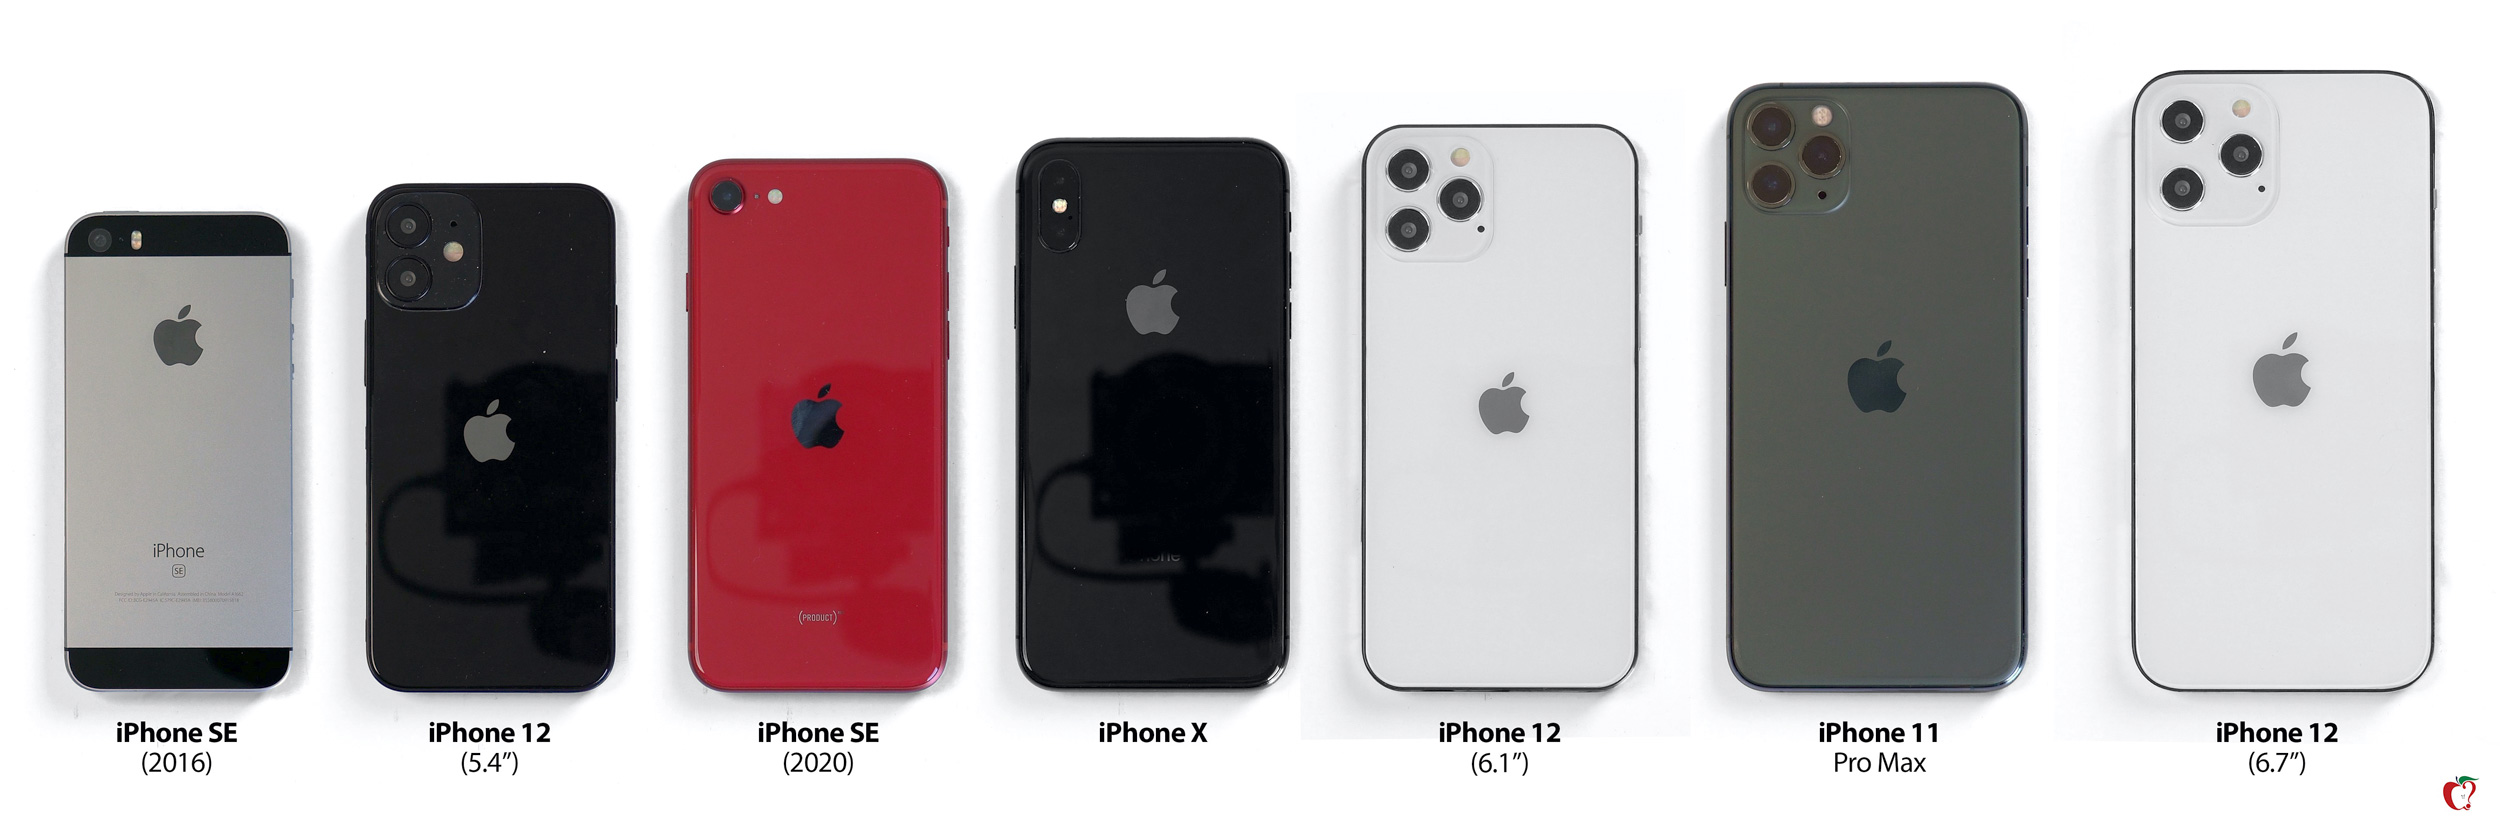 IPhone 12 Sizes Compared With IPhone SE, 7, 8, SE 2, X, 11, 11 Pro And